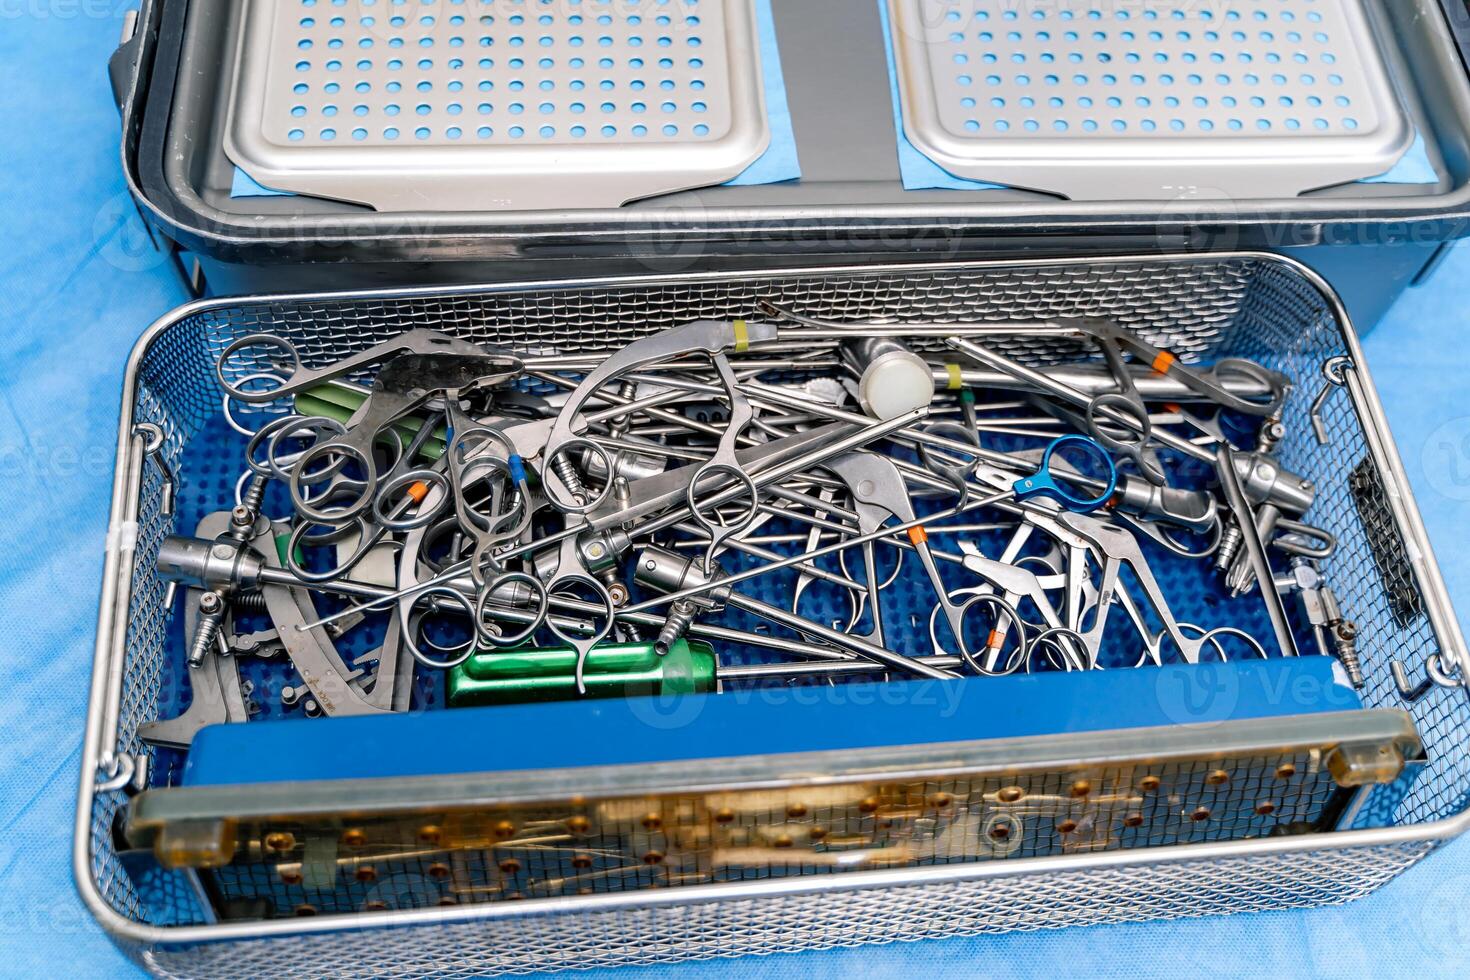 Surgical instruments and tools in the operating room. Operating tools in medical box. Selective focus. photo